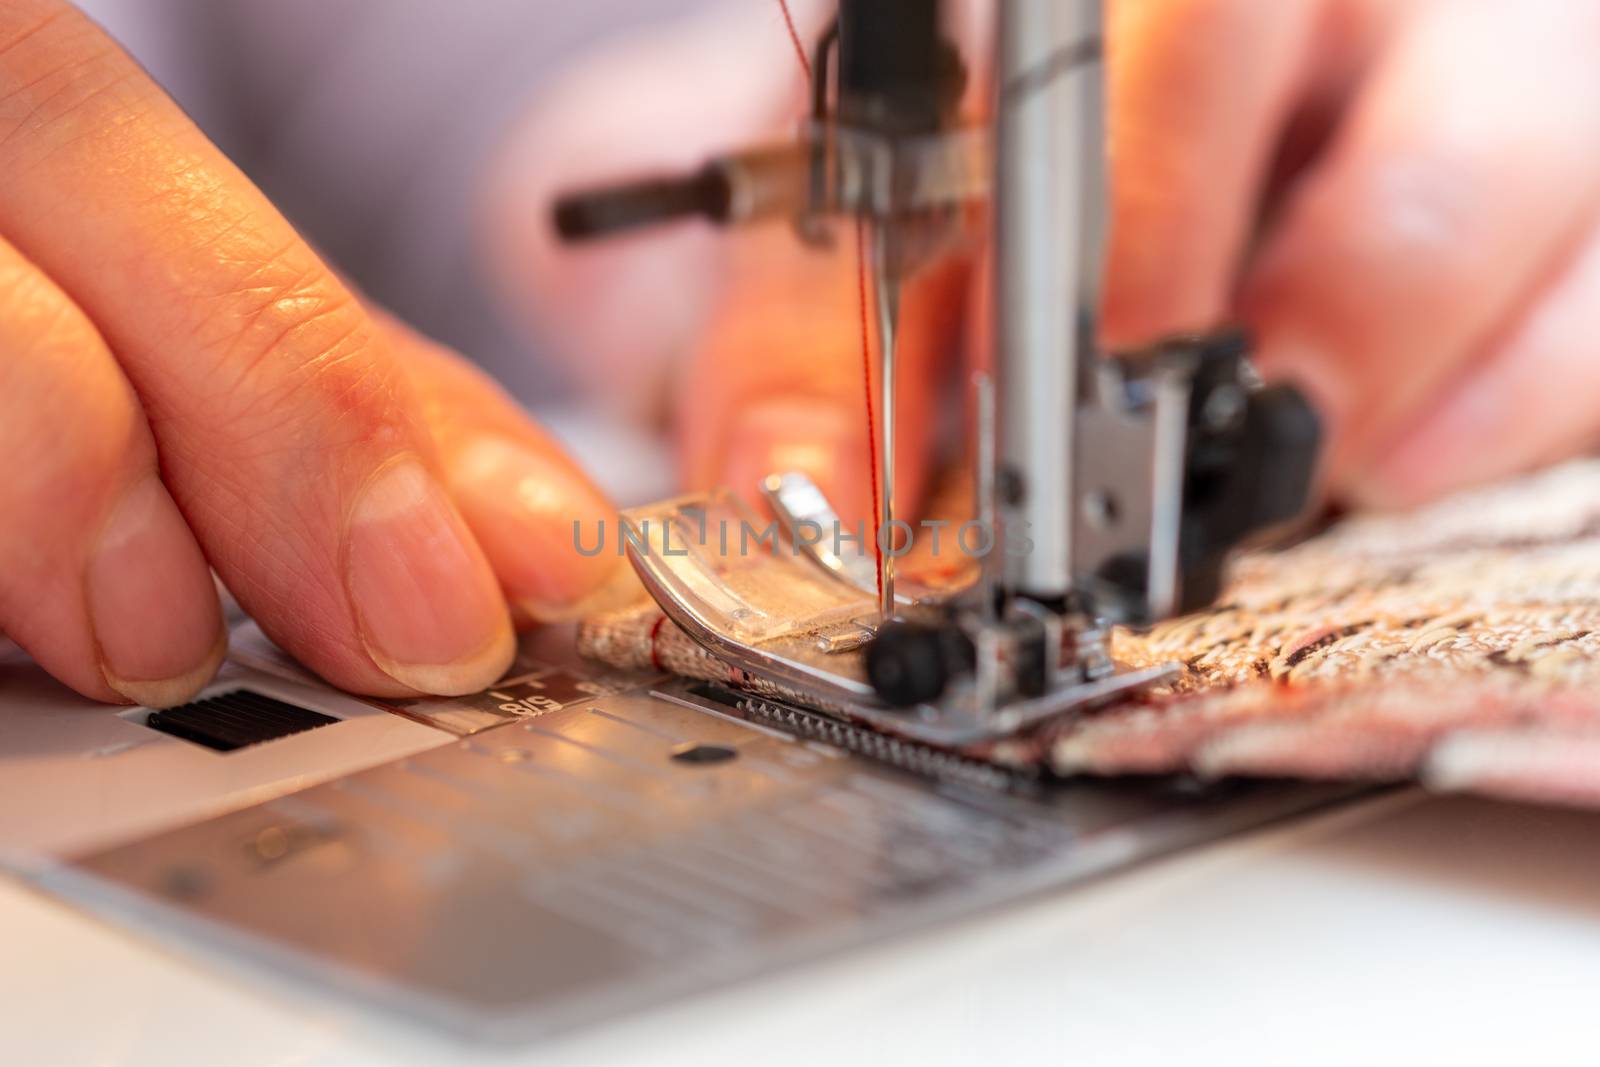 a close-up view of sewing process, hand of old woman using sewing machine, selective focus technique.